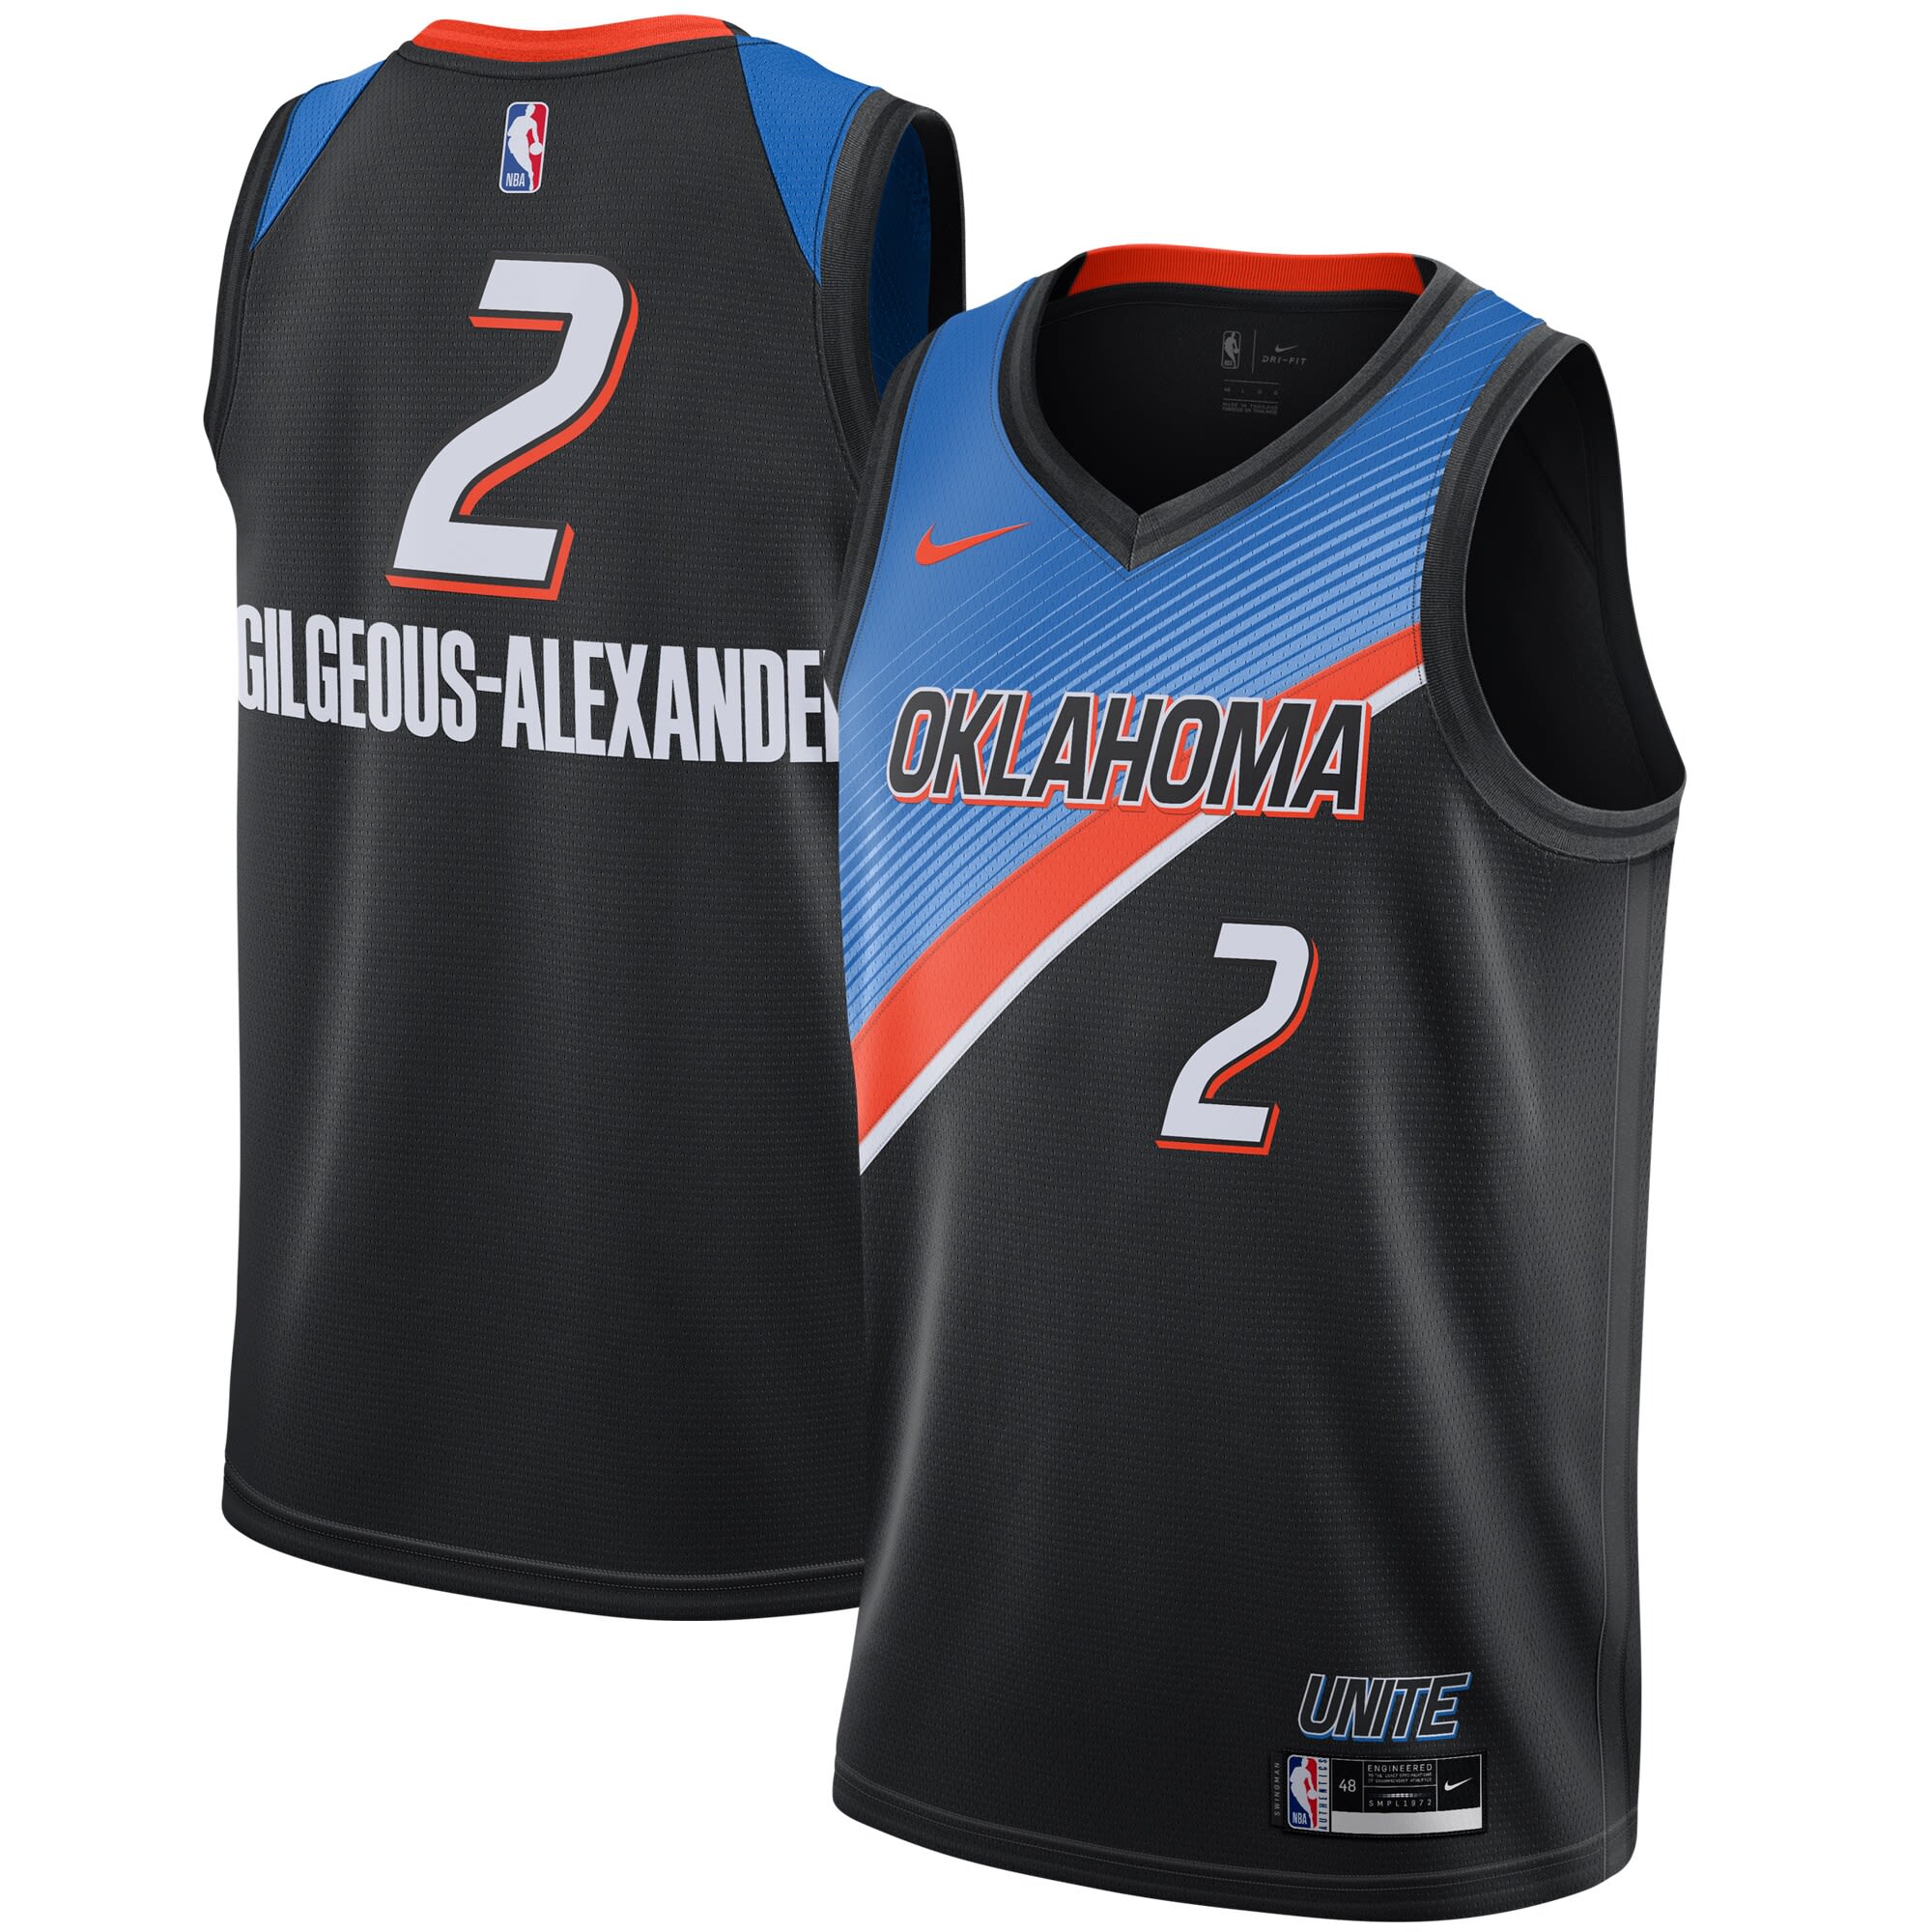 OKC THUNDER 202021 NIKE CITY EDITION PLAYER CUSTOM JERSEY THE OFFICIAL